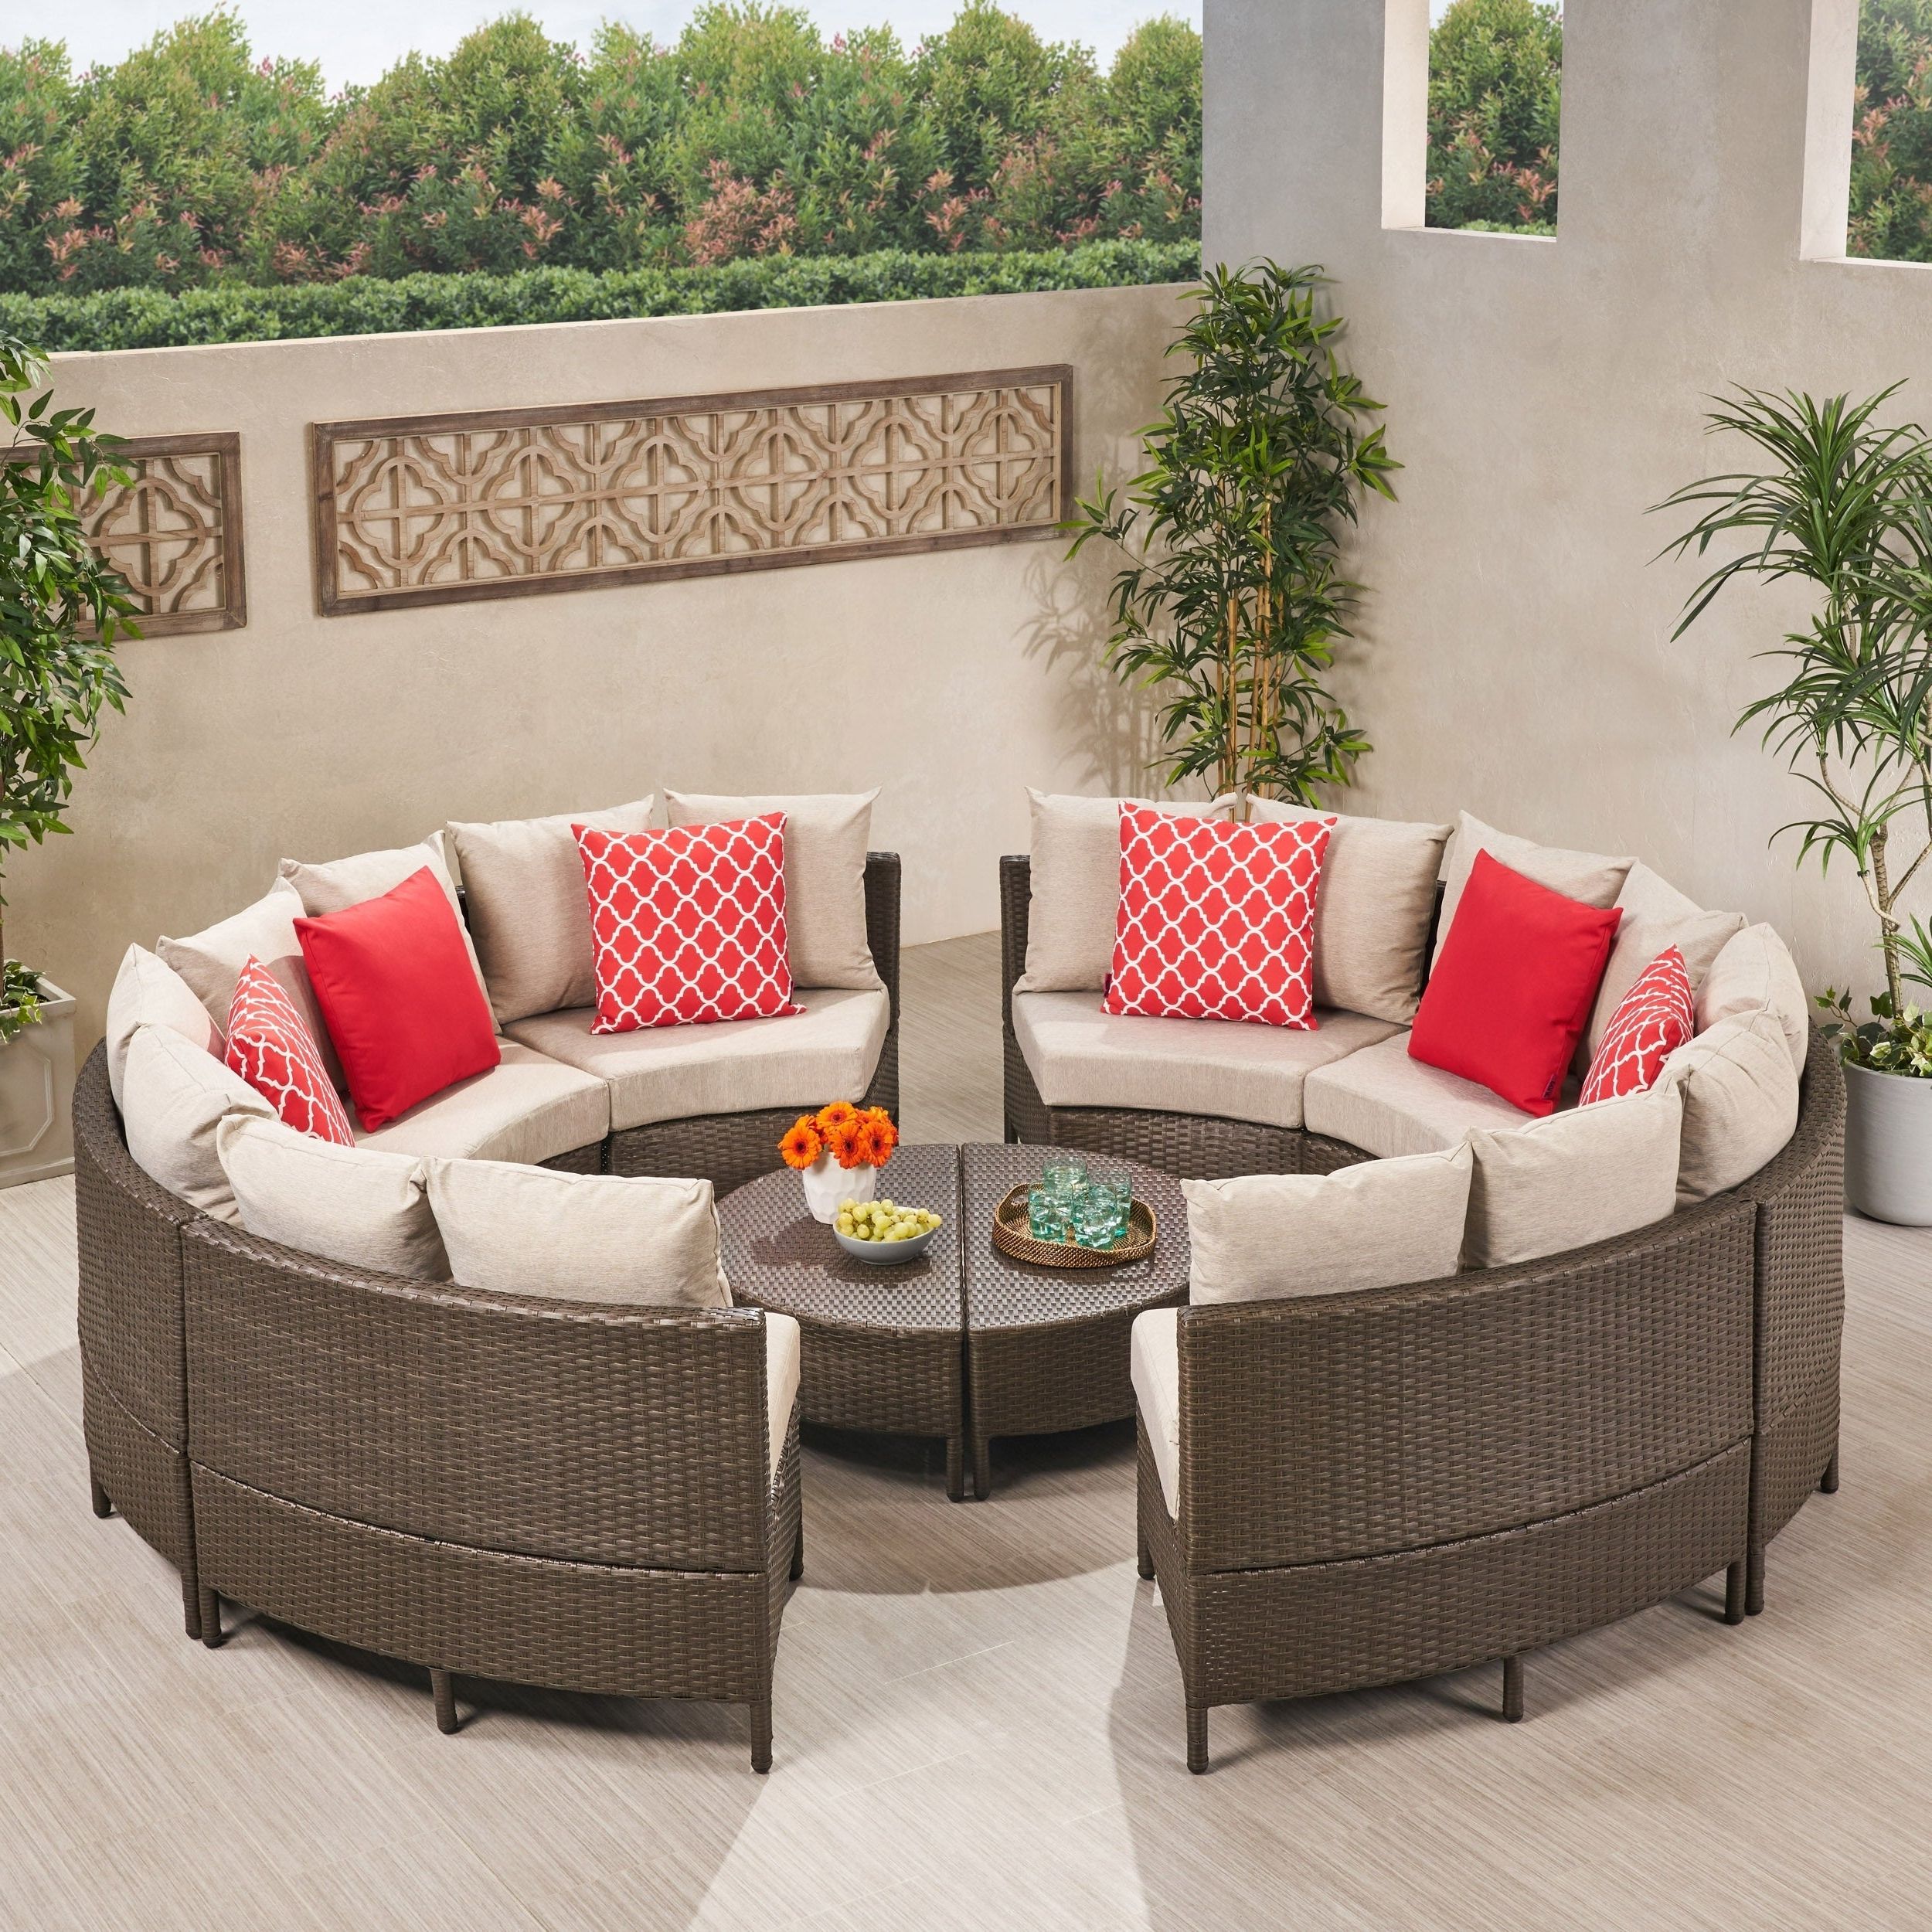 [%round Wicker Sectional Luxembourg, Save 44% – Baltijaskrasti.lv In 2020 All Weather Wicker Sectional Seating Group|all Weather Wicker Sectional Seating Group Throughout Most Current Round Wicker Sectional Luxembourg, Save 44% – Baltijaskrasti.lv|trendy All Weather Wicker Sectional Seating Group With Round Wicker Sectional Luxembourg, Save 44% – Baltijaskrasti.lv|recent Round Wicker Sectional Luxembourg, Save 44% – Baltijaskrasti.lv Intended For All Weather Wicker Sectional Seating Group%] (Photo 2 of 15)